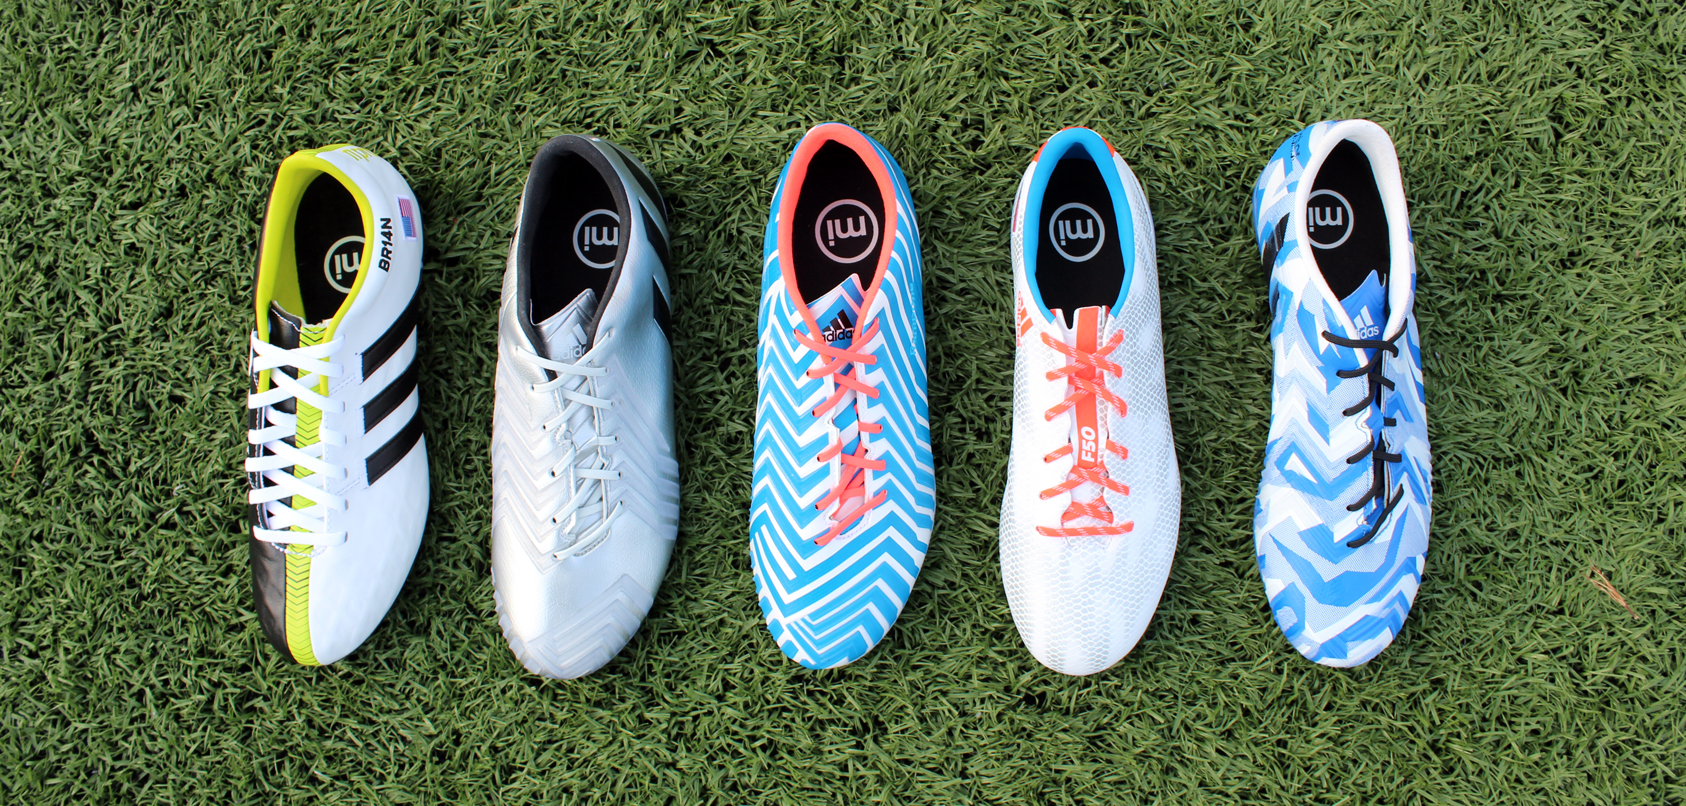 Women's World Cup miadidas cleats